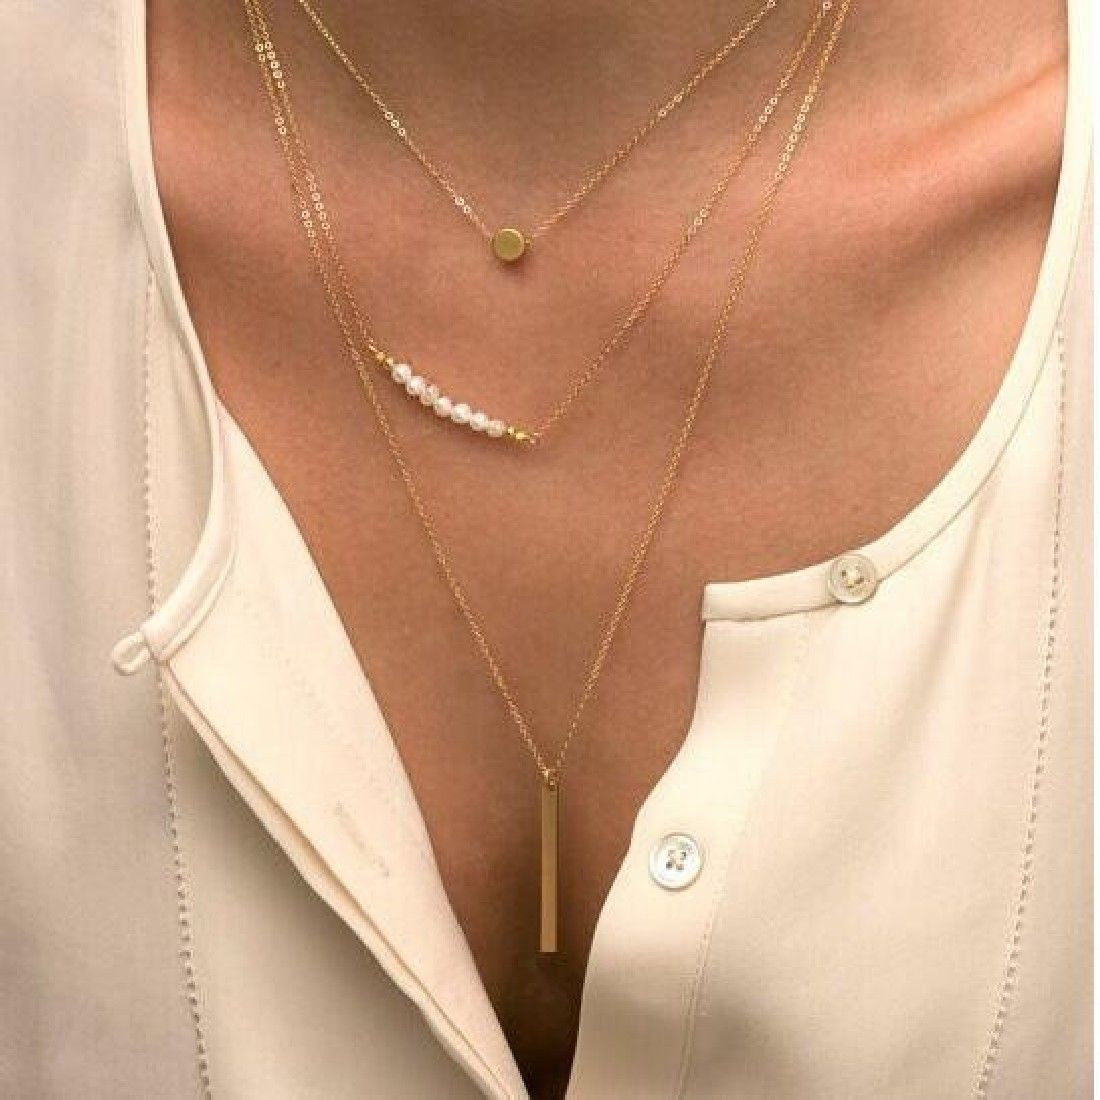 Aimee Pearl + Gold Layered Necklace